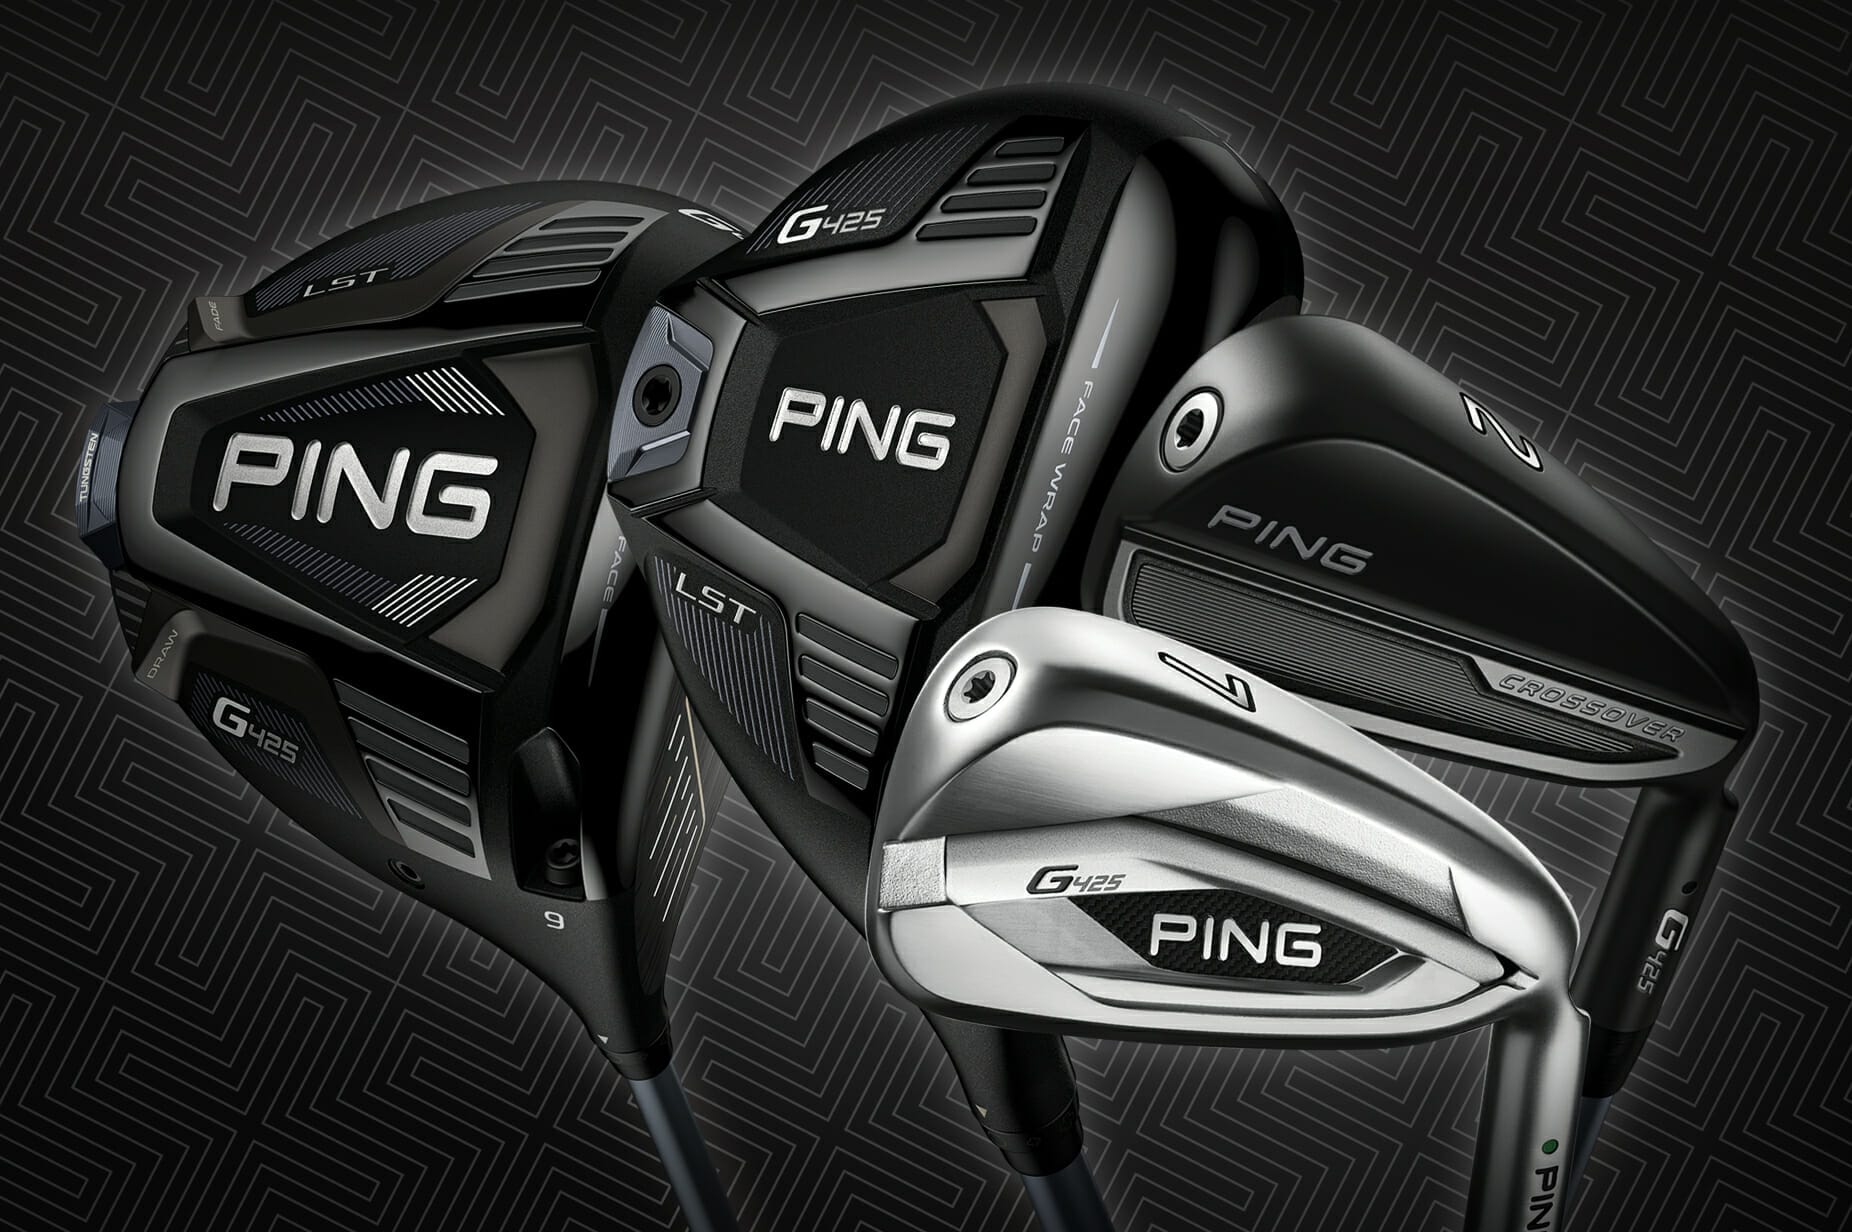 PING introduces G425 drivers, fairways, hybrids, irons and